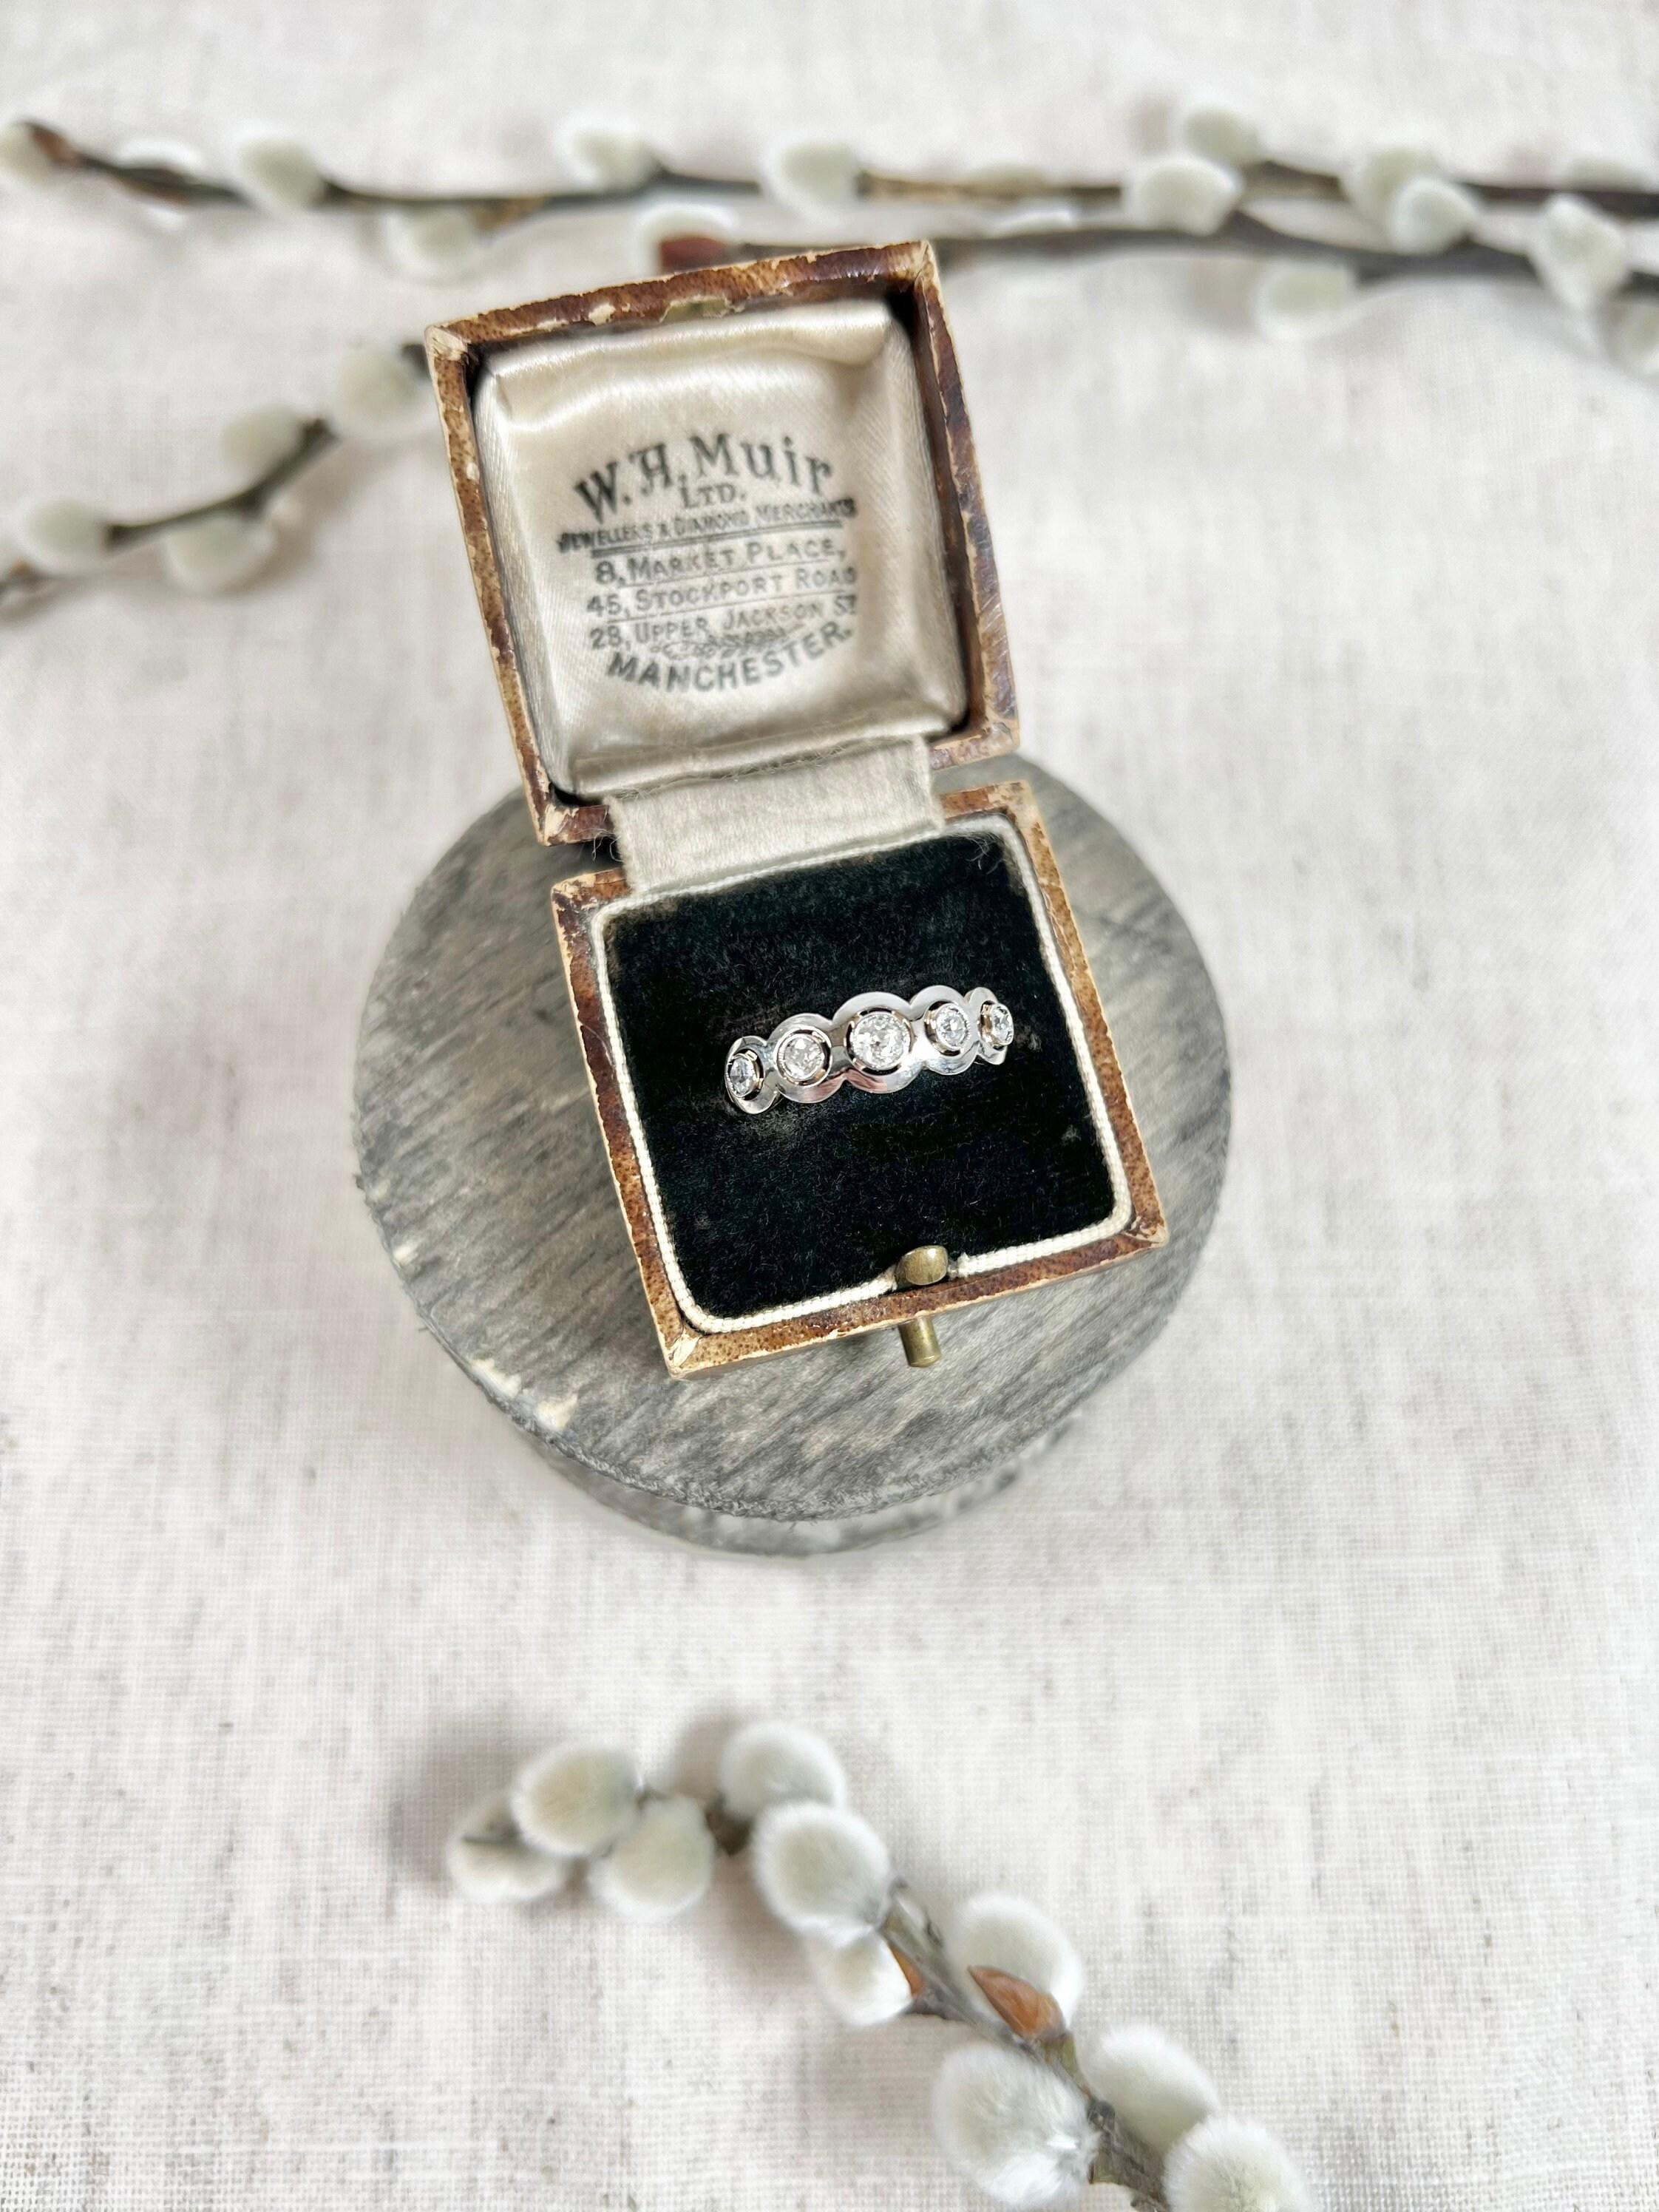 Antique Five Stone Ring 

18ct Gold & Platinum Tested

Circa 1910

Beautiful, Edwardian five stone diamond ring. 
Features gorgeous target style settings. The natural diamonds are set in platinum & mounted on an 18ct yellow gold band. 

Ring measure